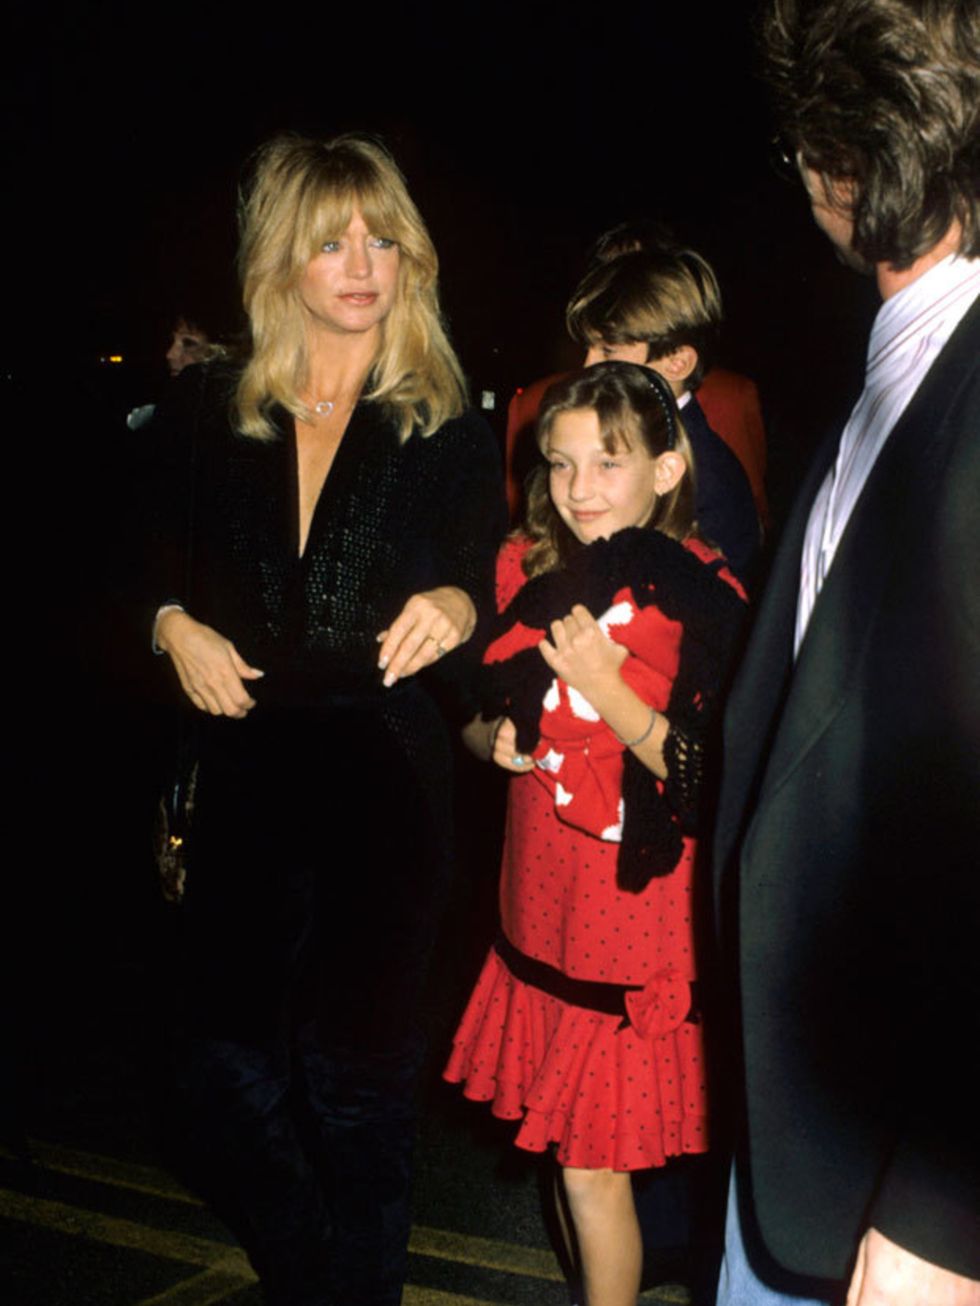 Kate Hudson, 10, with her mother Goldie Hawn

At Big Sisters Organisation Honors Goldie Hawn in 1989